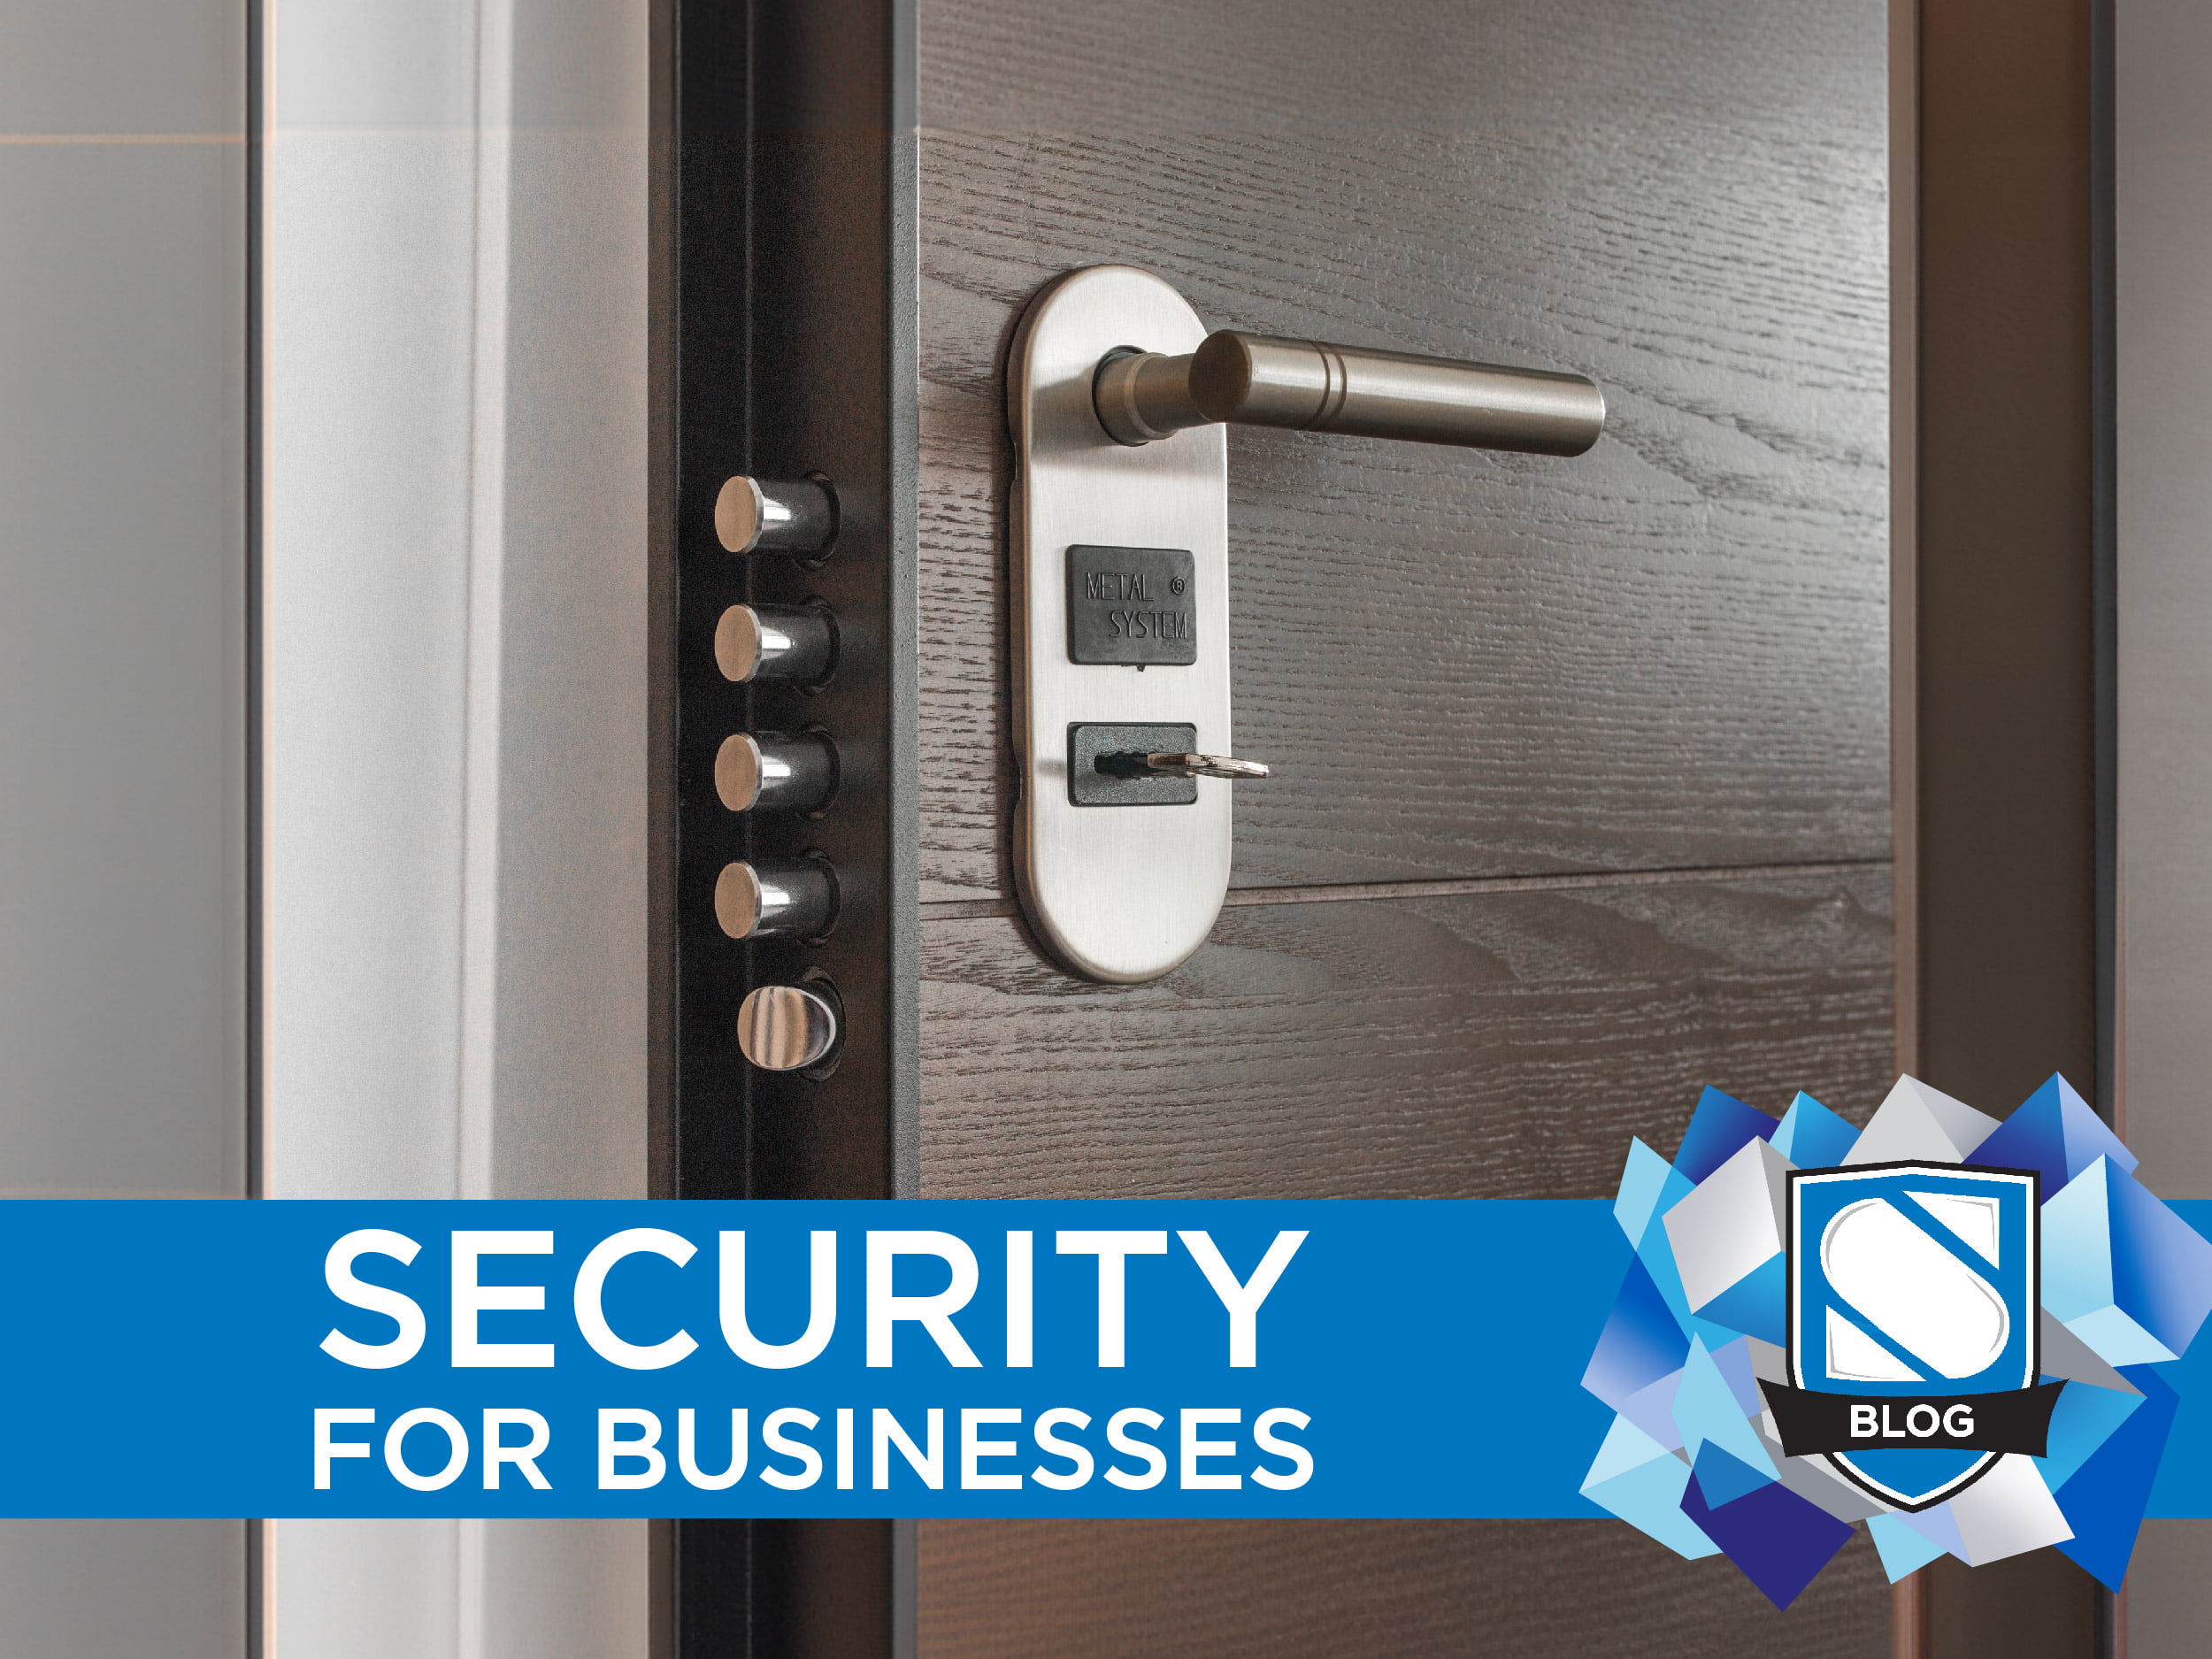 Security Suggestions to Help Keep Your Business Property Safe